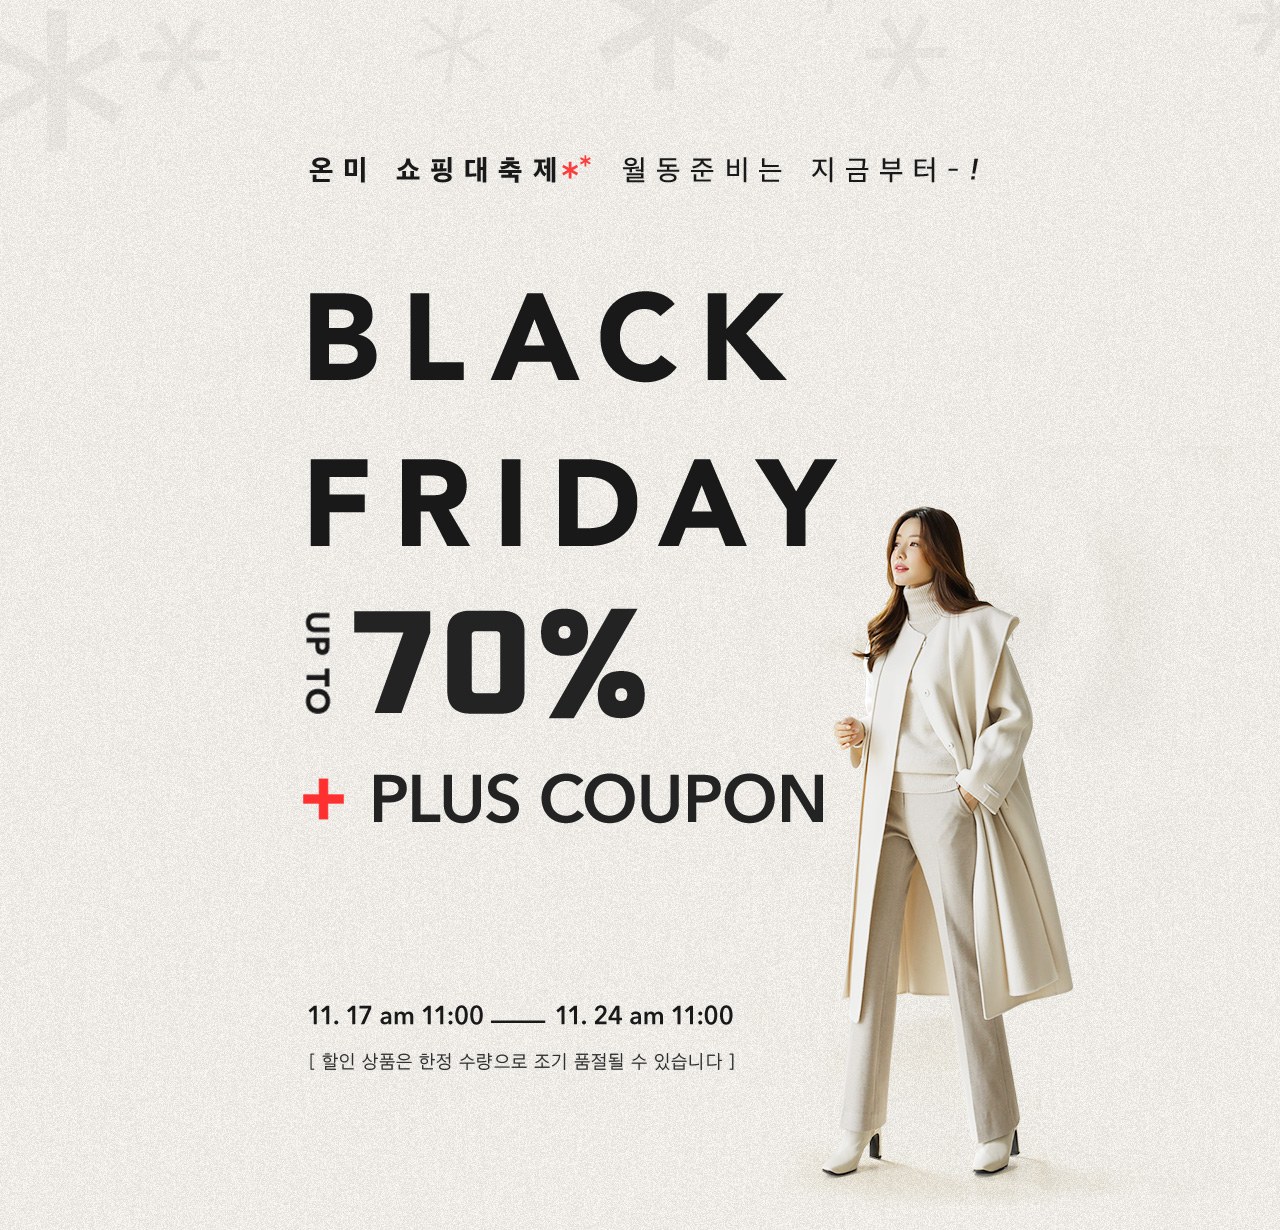 ♥ BLACK FRIDAY UP TO70% SALE + PLUS COUPON ♥